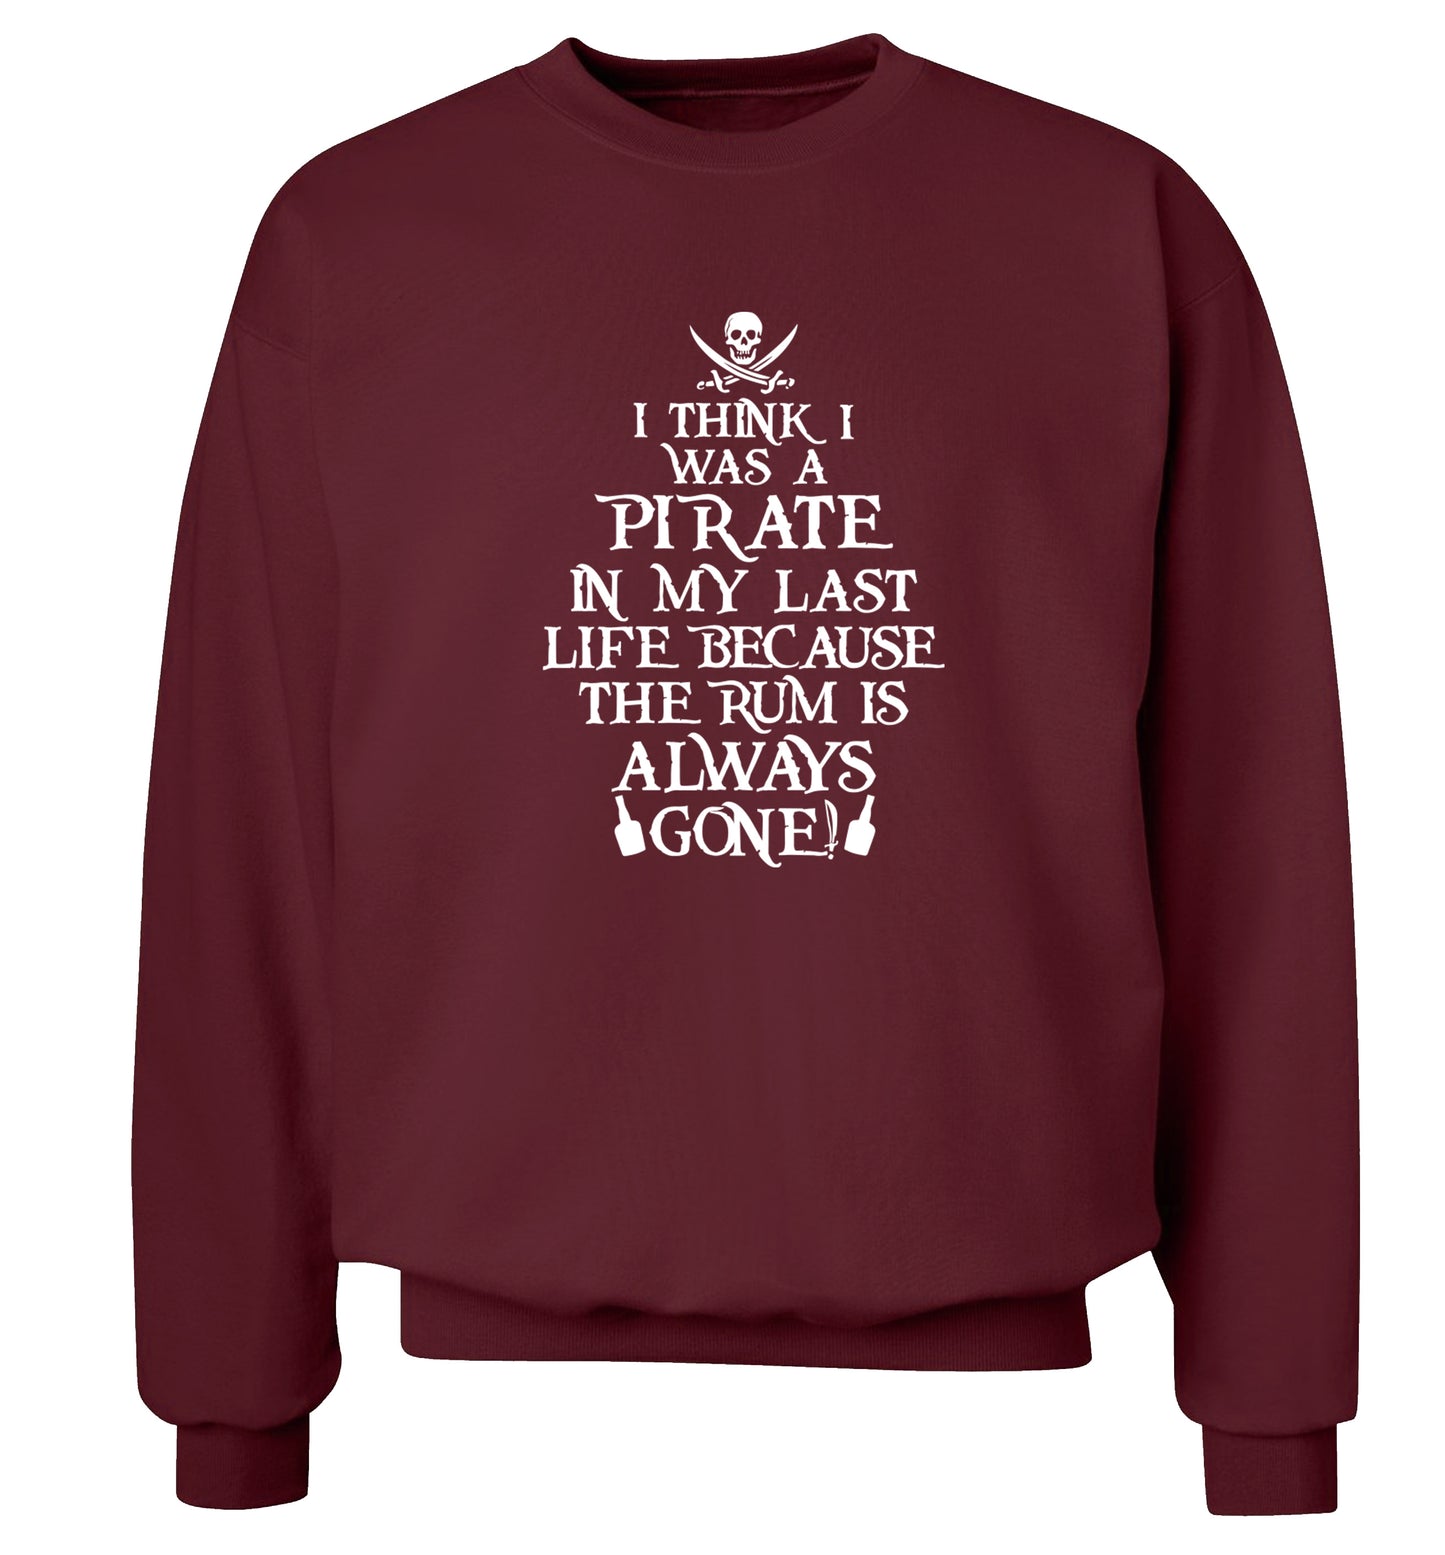 I think I was a pirate in my past life because the rum is always gone! Adult's unisex maroon Sweater 2XL